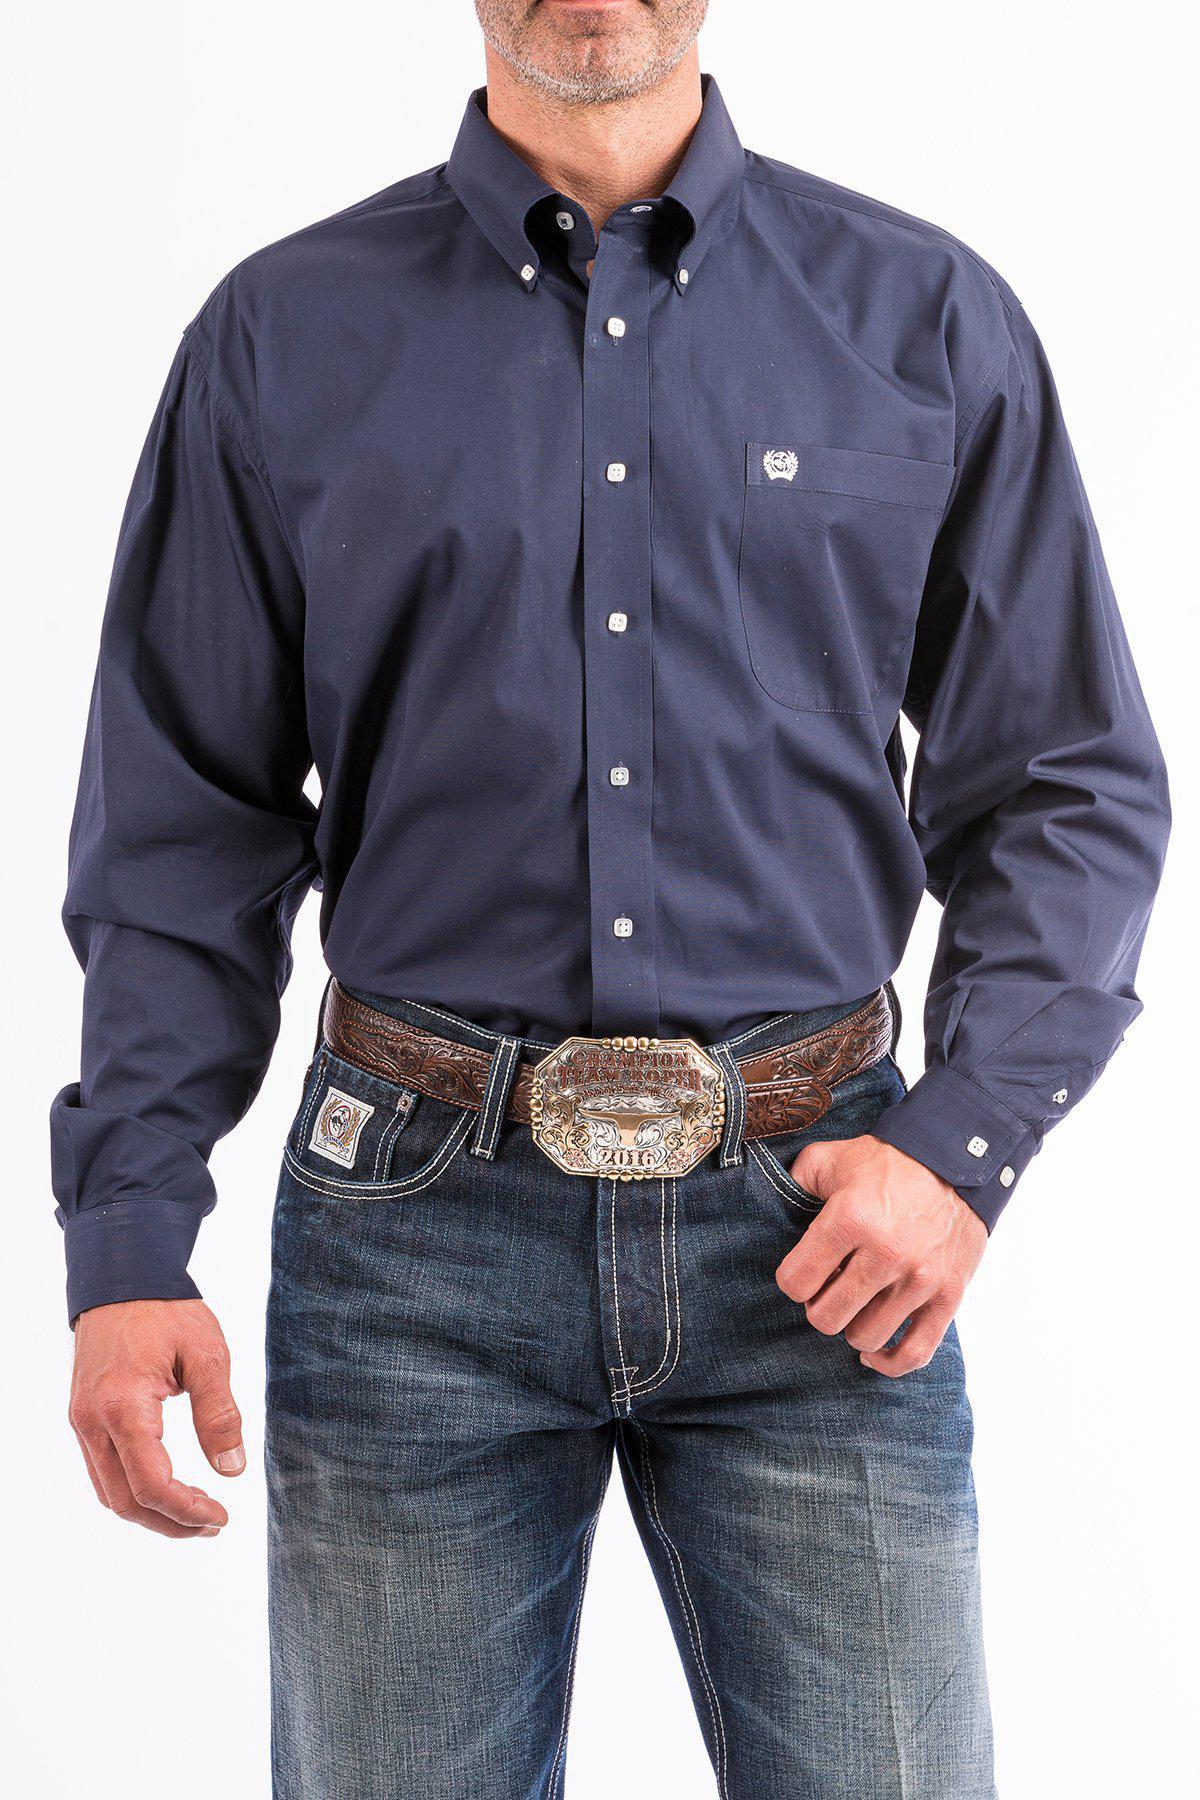 CINCH'S MEN'S SOLID NAVY WESTERN BUTTON-DOWN LONG SLEEVE MTW1104667